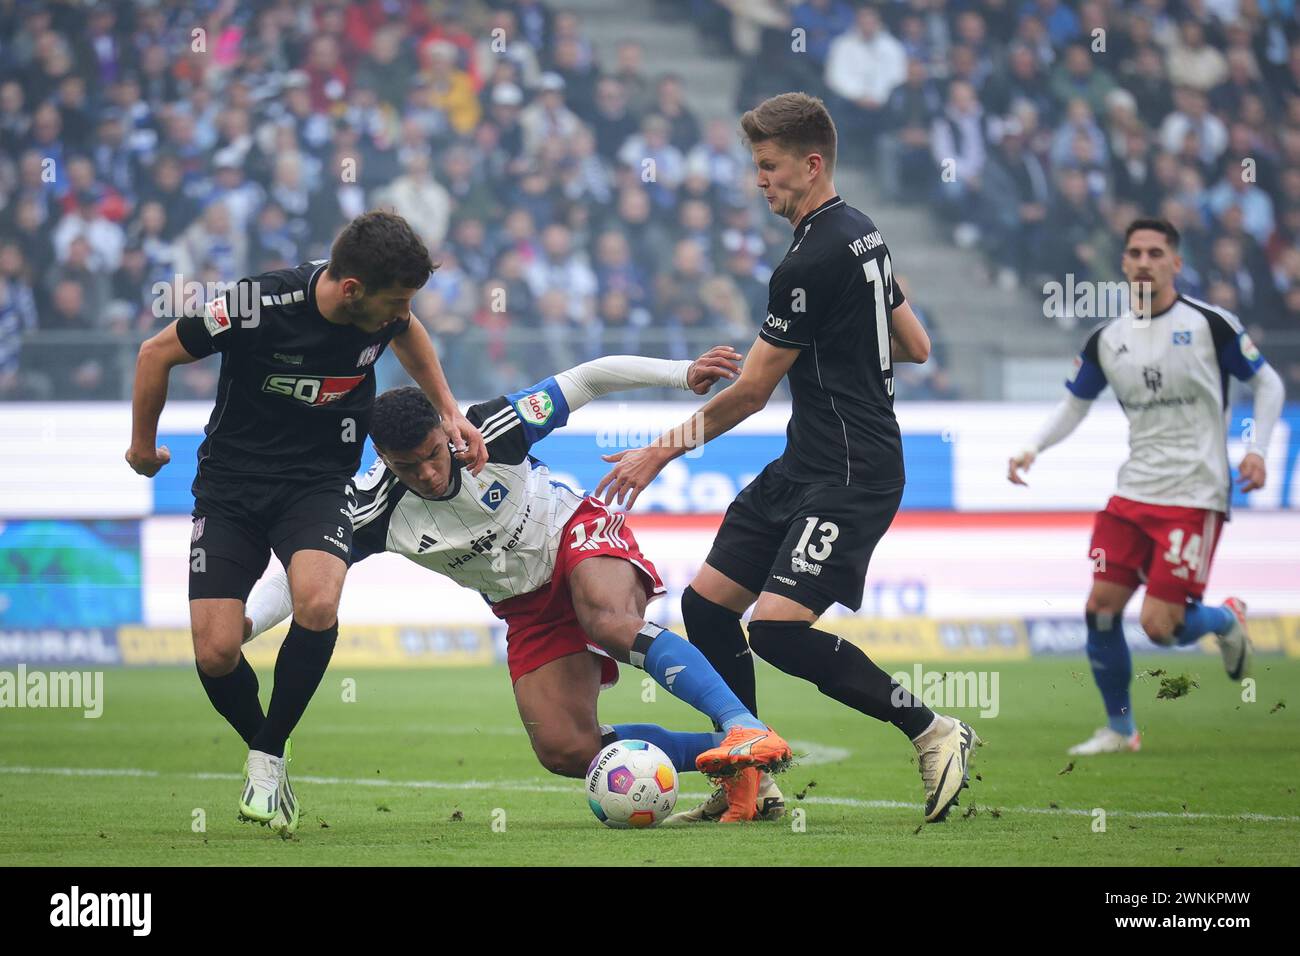 Hamburg, Germany. 03rd Mar, 2024. Soccer: Bundesliga 2, matchday 24, Hamburger SV - VfL Osnabrück, at the Volksparkstadion. Hamburg's Ransford Königsdörffer (M) and Osnabrück's Bashkim Ajdini (l) and Lukas Kunze fighting for the ball. Credit: Christian Charisius/dpa - IMPORTANT NOTE: In accordance with the regulations of the DFL German Football League and the DFB German Football Association, it is prohibited to utilize or have utilized photographs taken in the stadium and/or of the match in the form of sequential images and/or video-like photo series./dpa/Alamy Live News Stock Photo